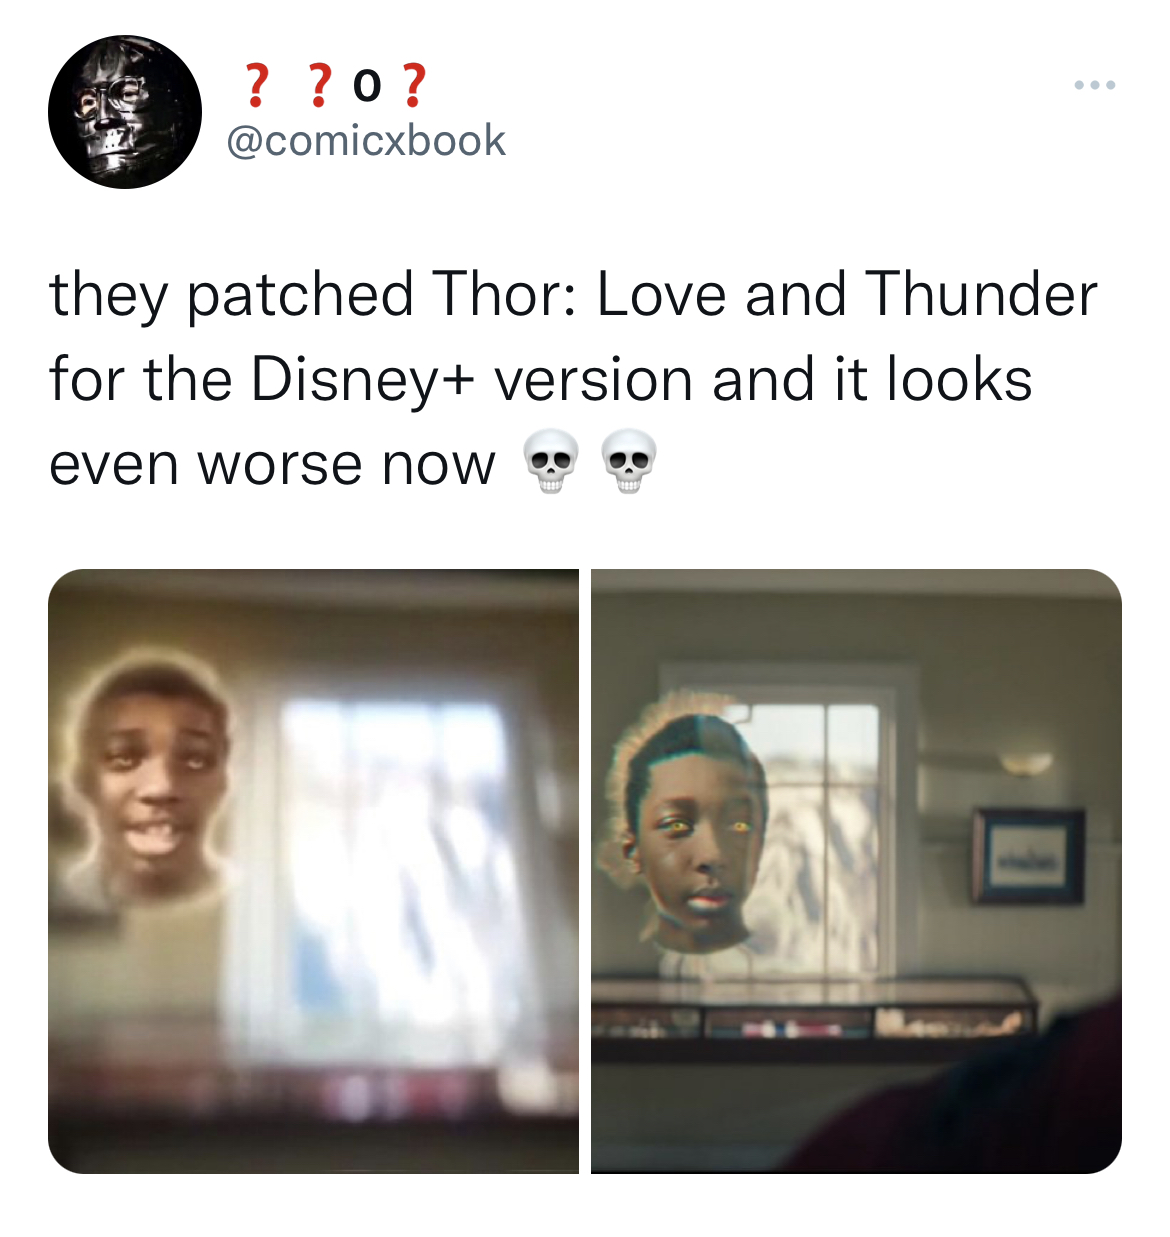 Fresh and funny tweets - media - ? ? 0? they patched Thor Love and Thunder for the Disney version and it looks even worse now